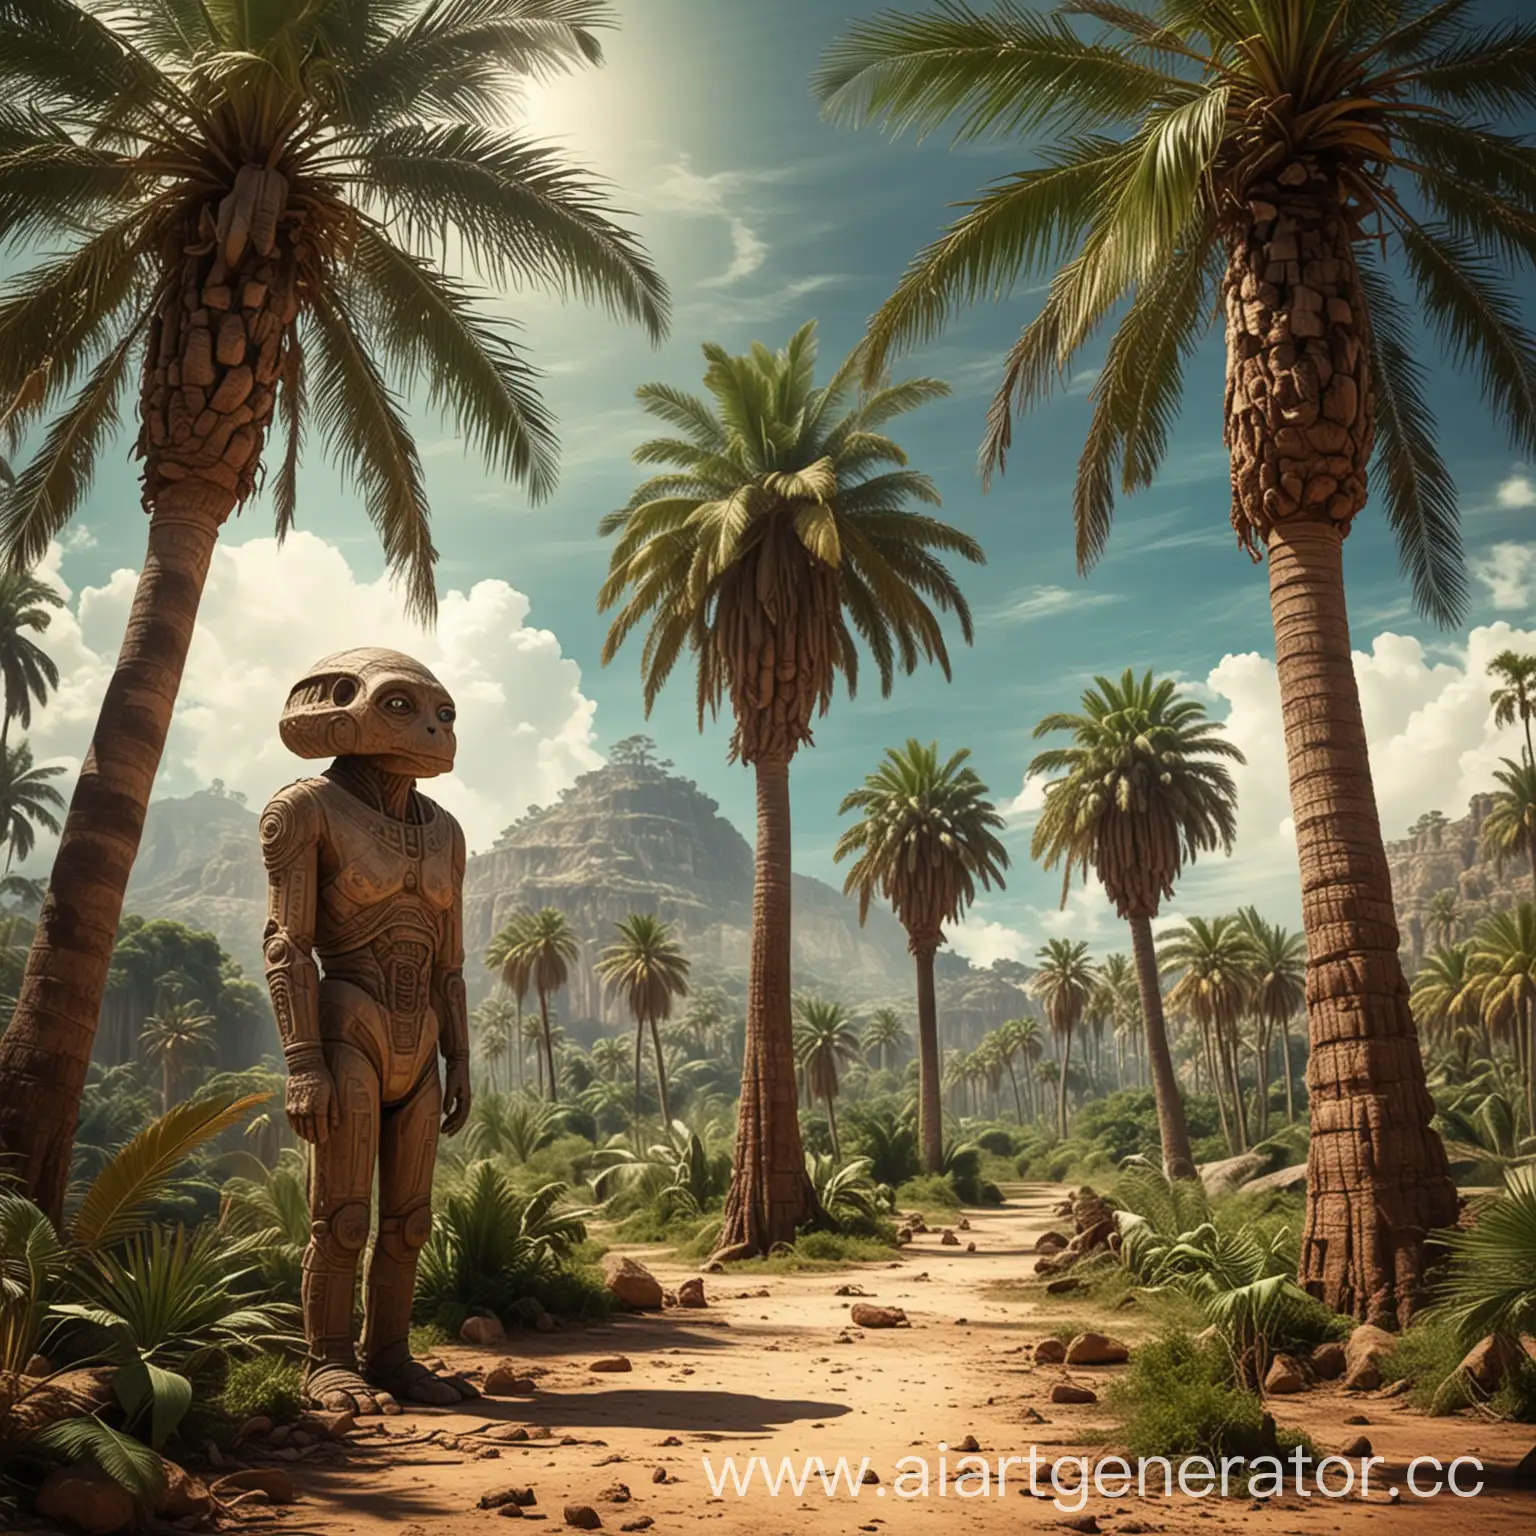 Ancient-Advanced-Civilizations-and-Wise-Aliens-Observing-NLO-in-a-Tropical-Palm-Atmosphere